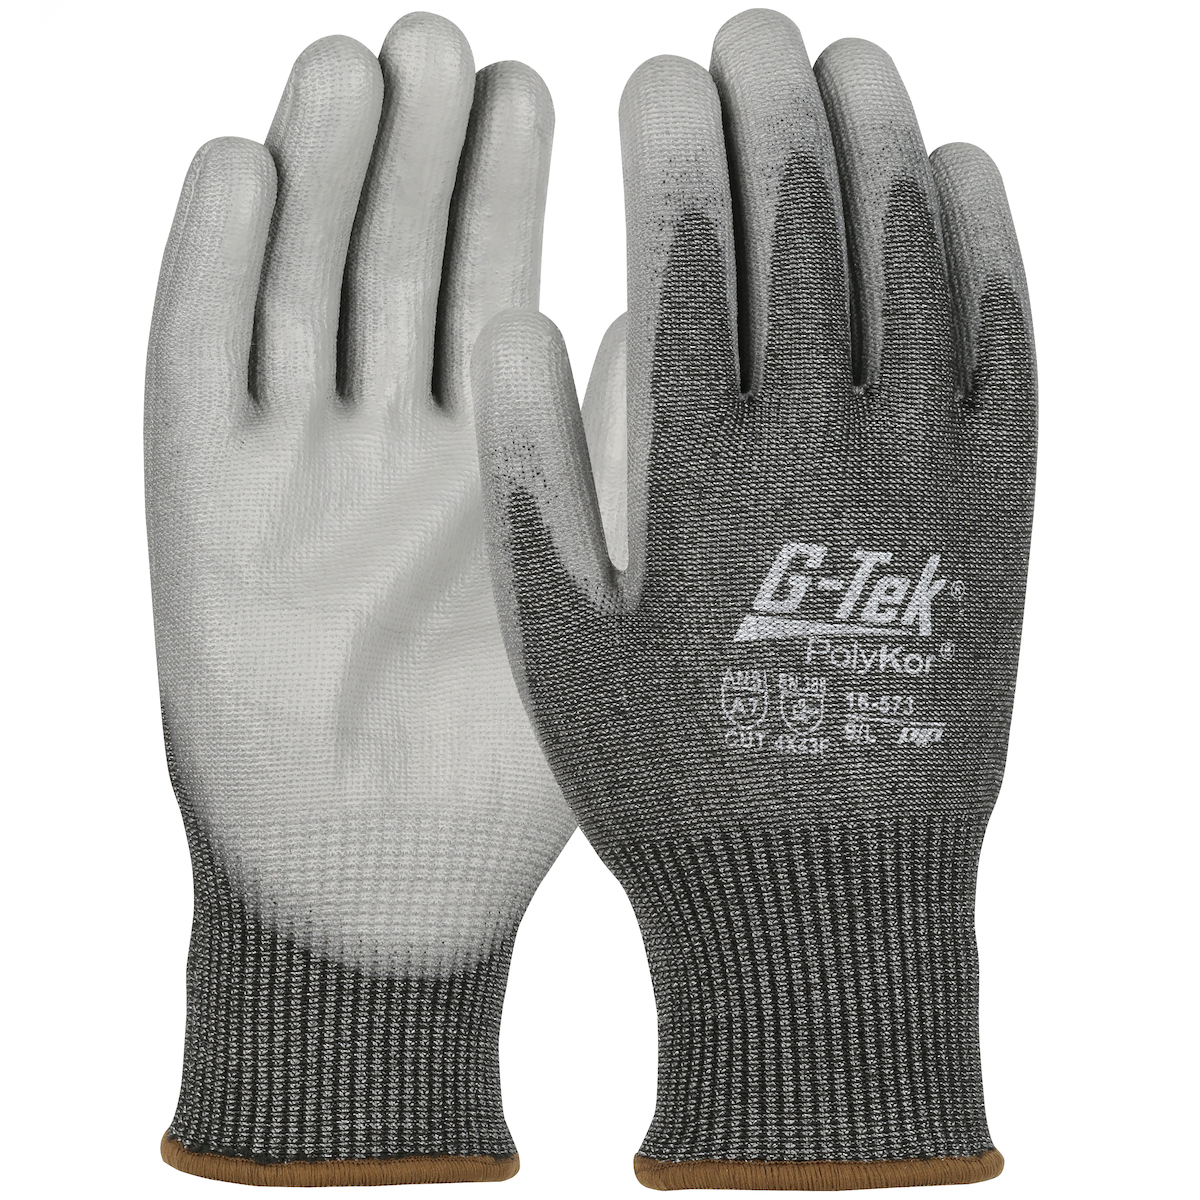 #16-573 PIP® G-Tek®  Seamless Knit PolyKor®  Glove with PU Coated Grip on Palm & Fingers - Touchscreen Compatible 